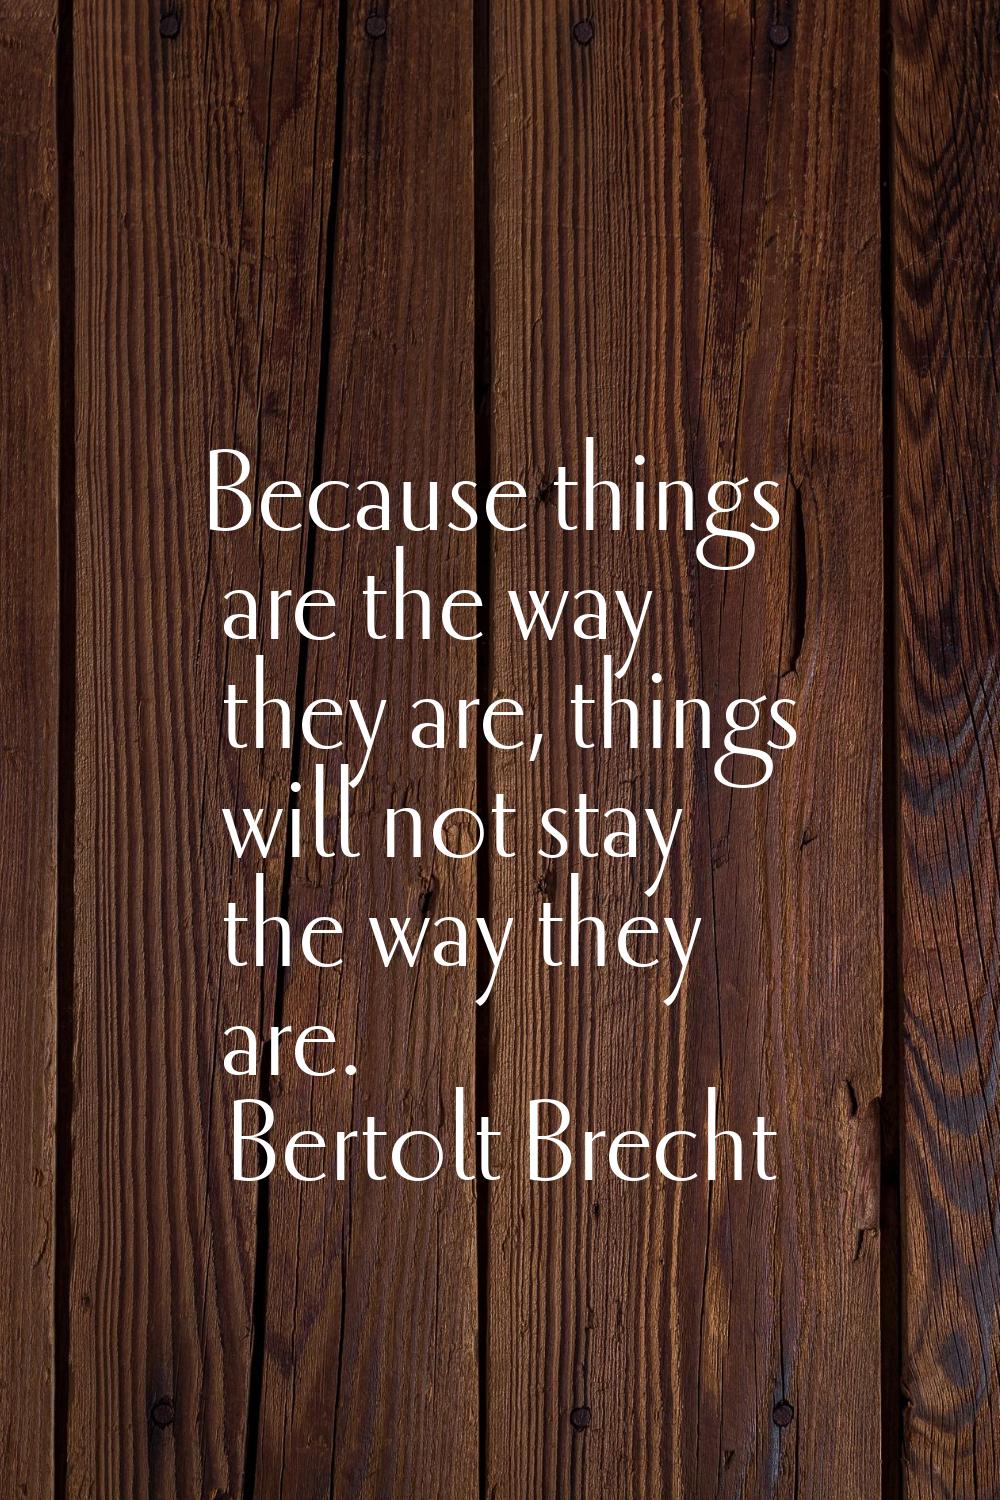 Because things are the way they are, things will not stay the way they are.